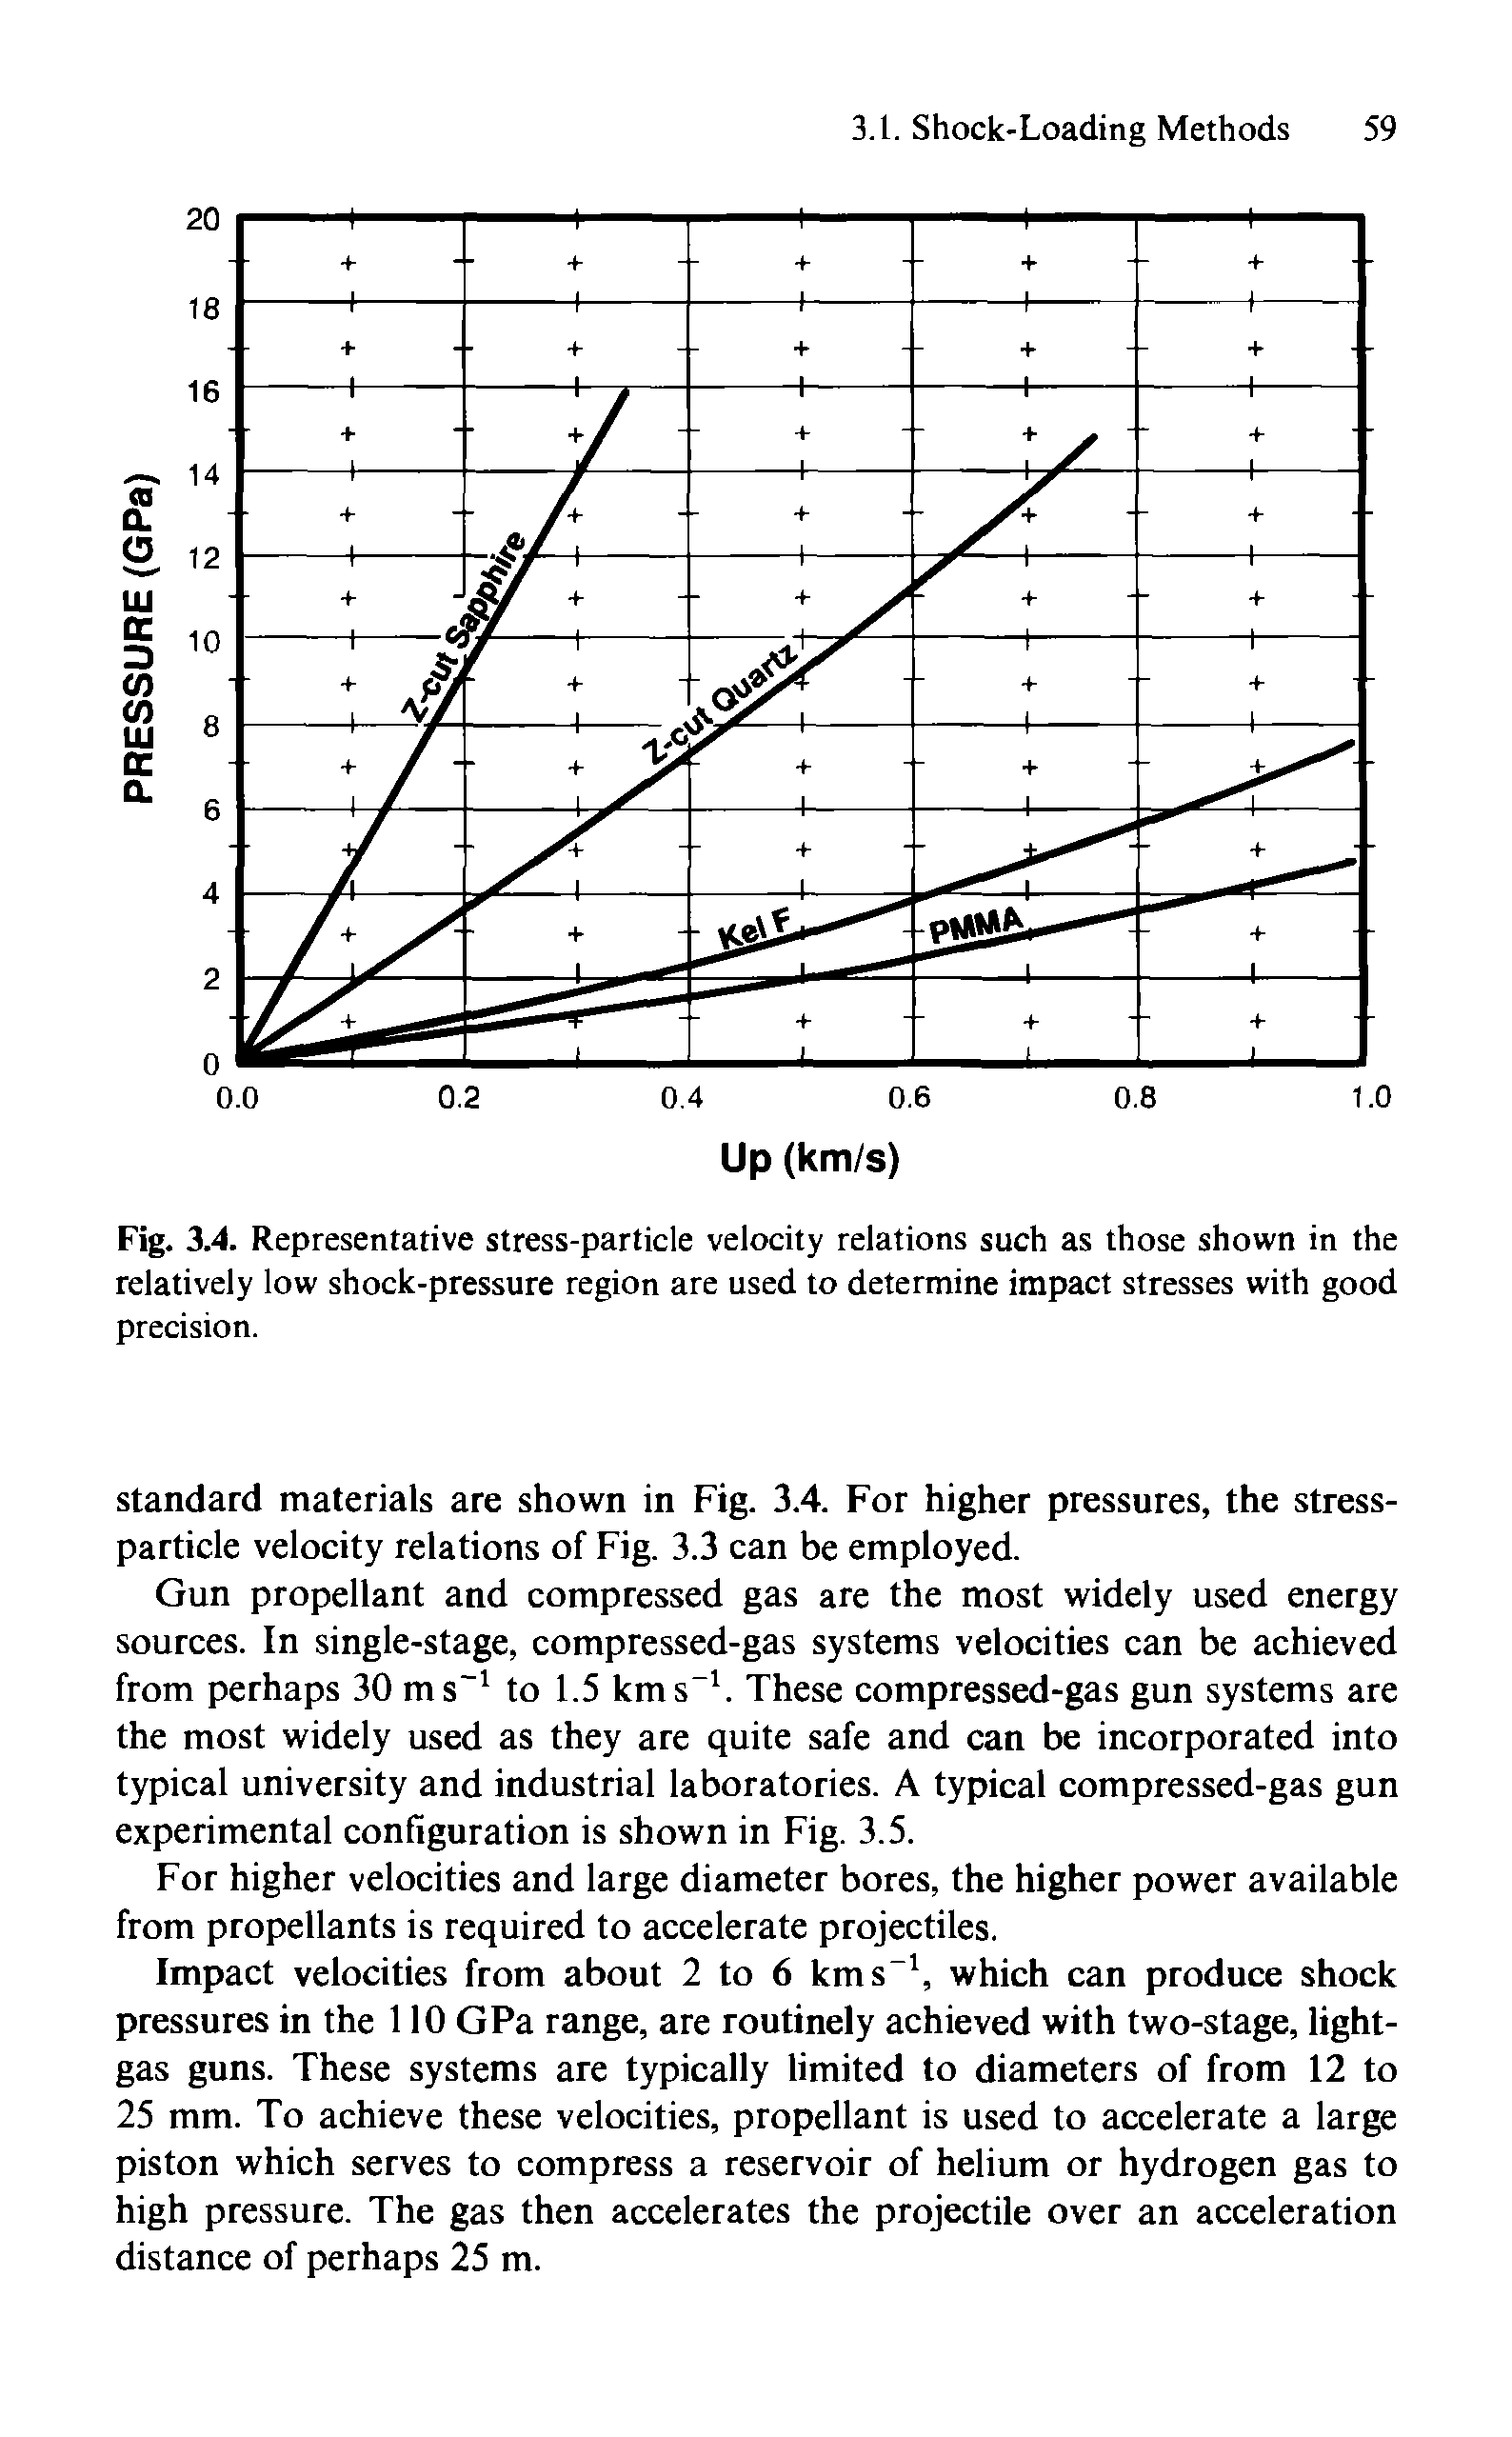 Fig. 3.4. Representative stress-particle velocity relations such as those shown in the relatively low shock-pressure region are used to determine impact stresses with good precision.